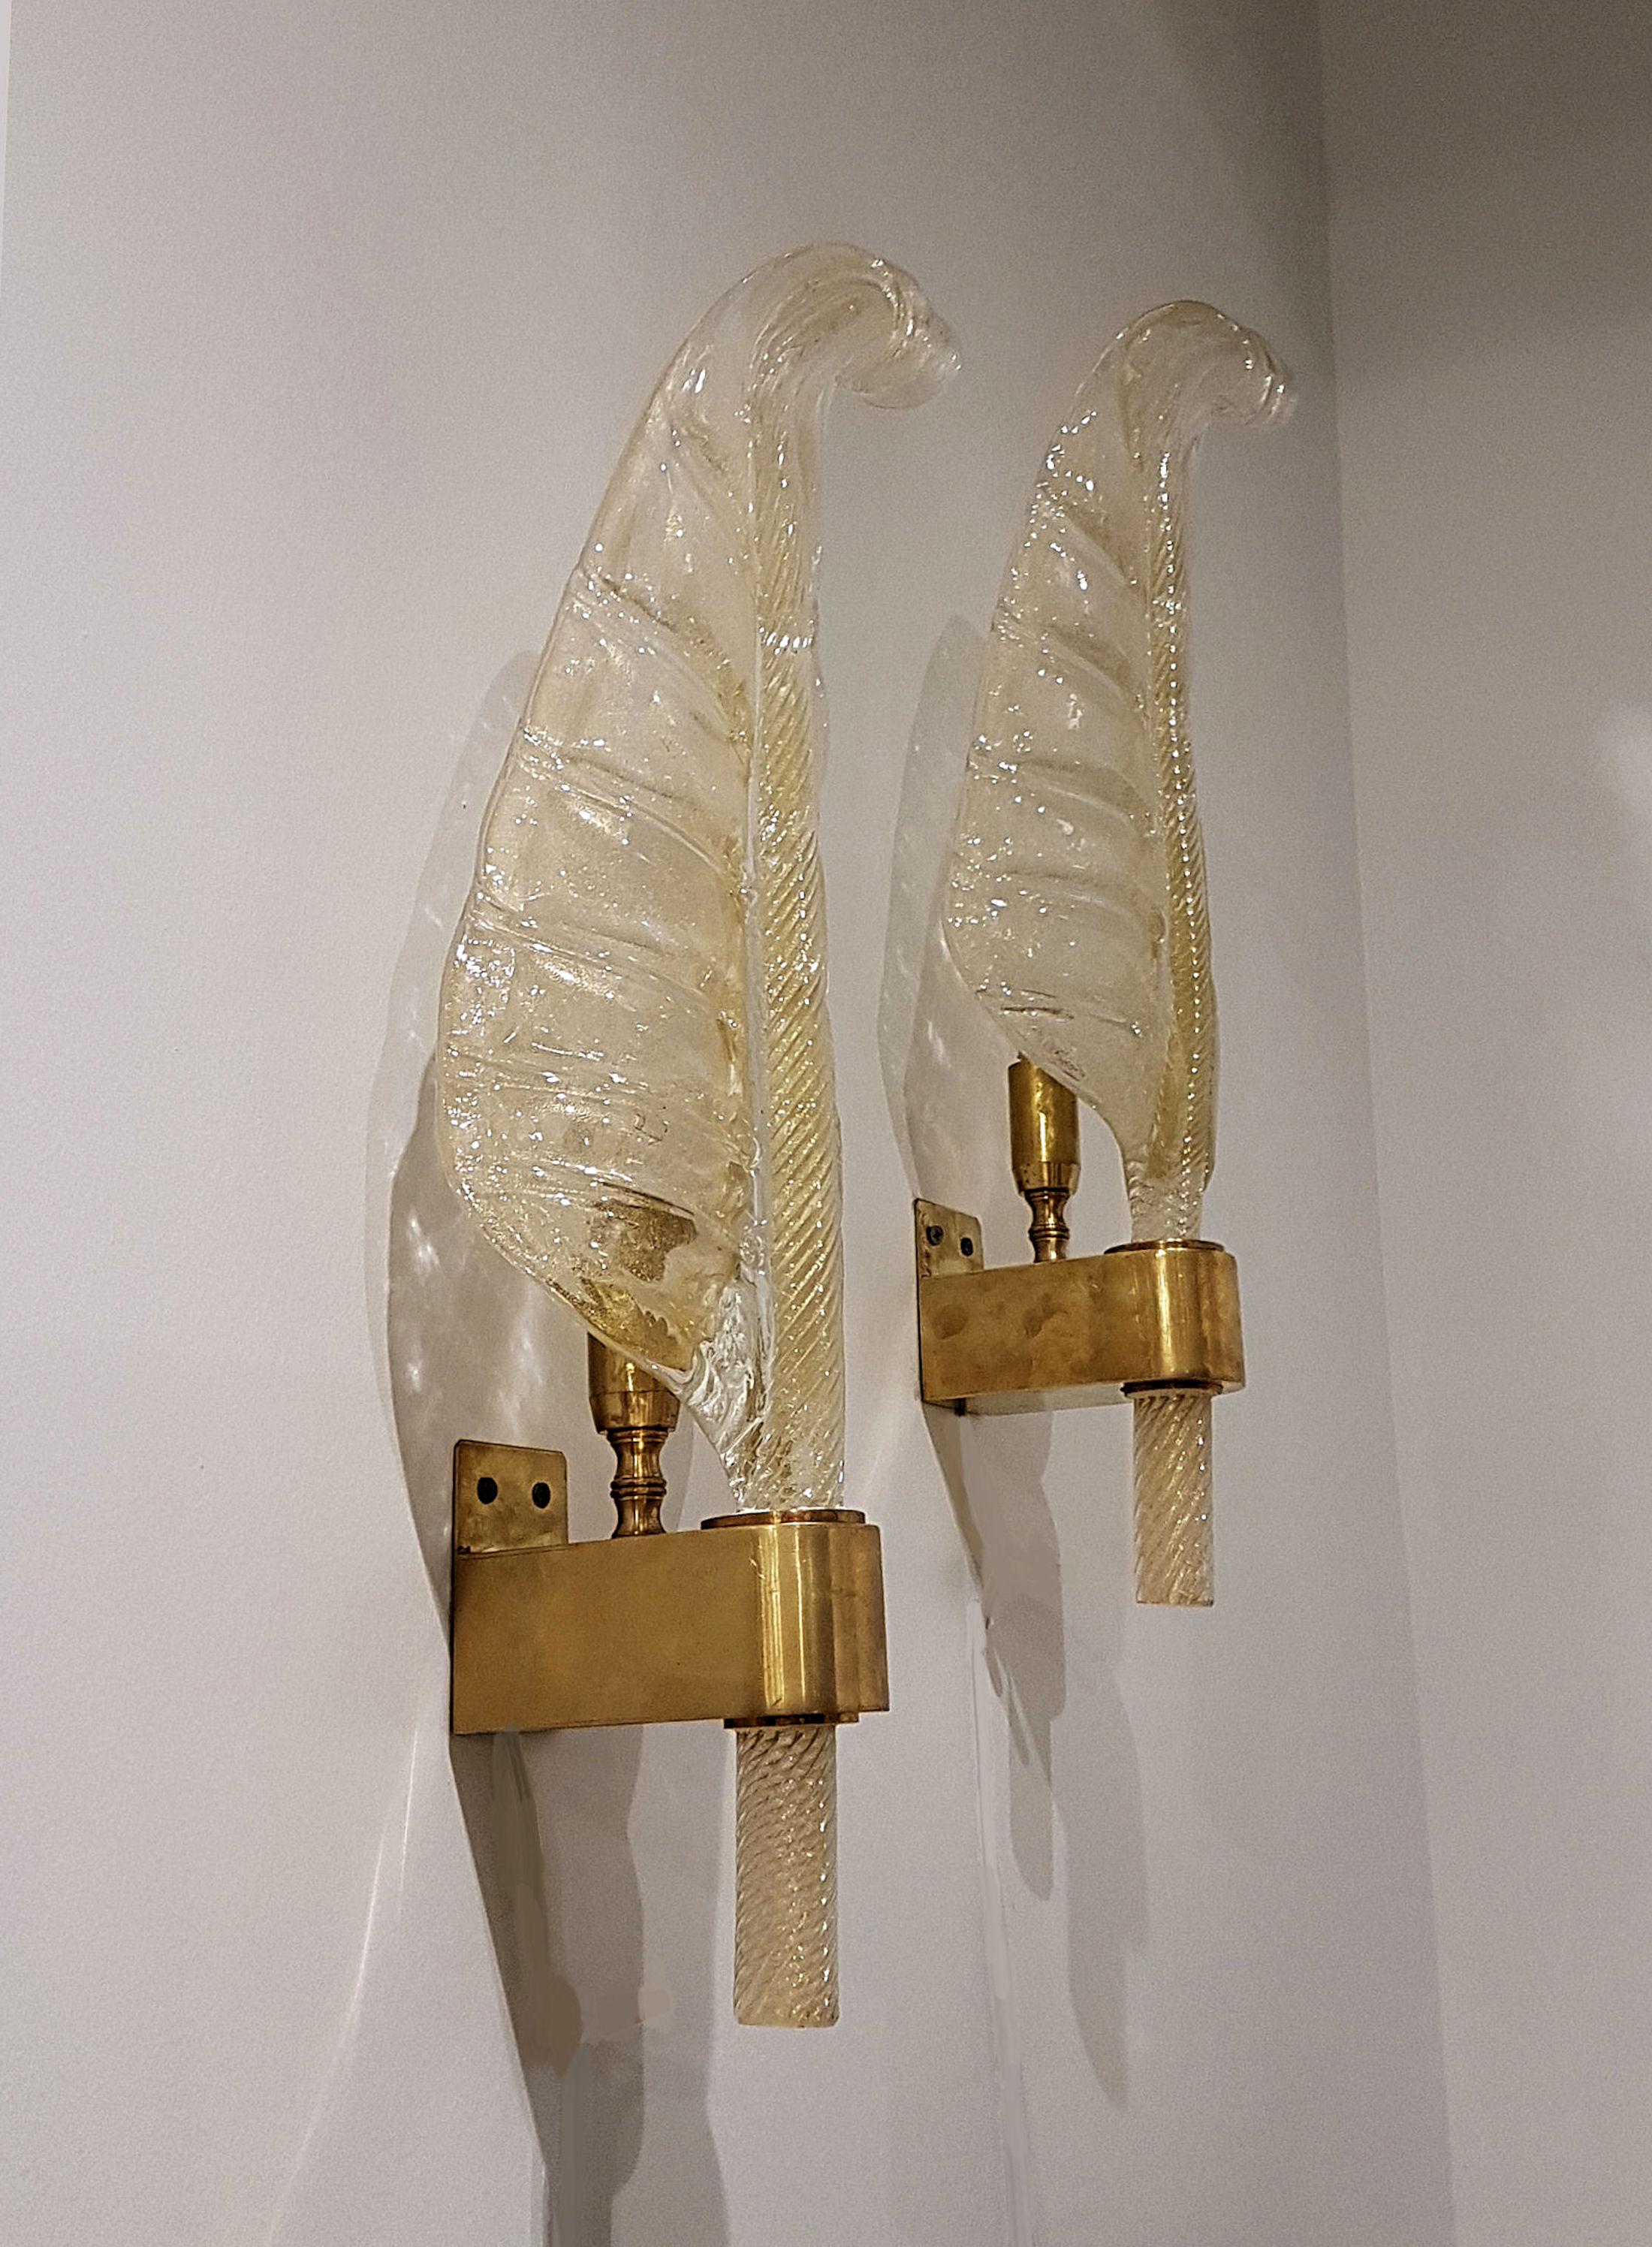 Two Pairs of Gold Murano Glass Leaf Sconces, Barovier Style, Mid-Century Modern 1